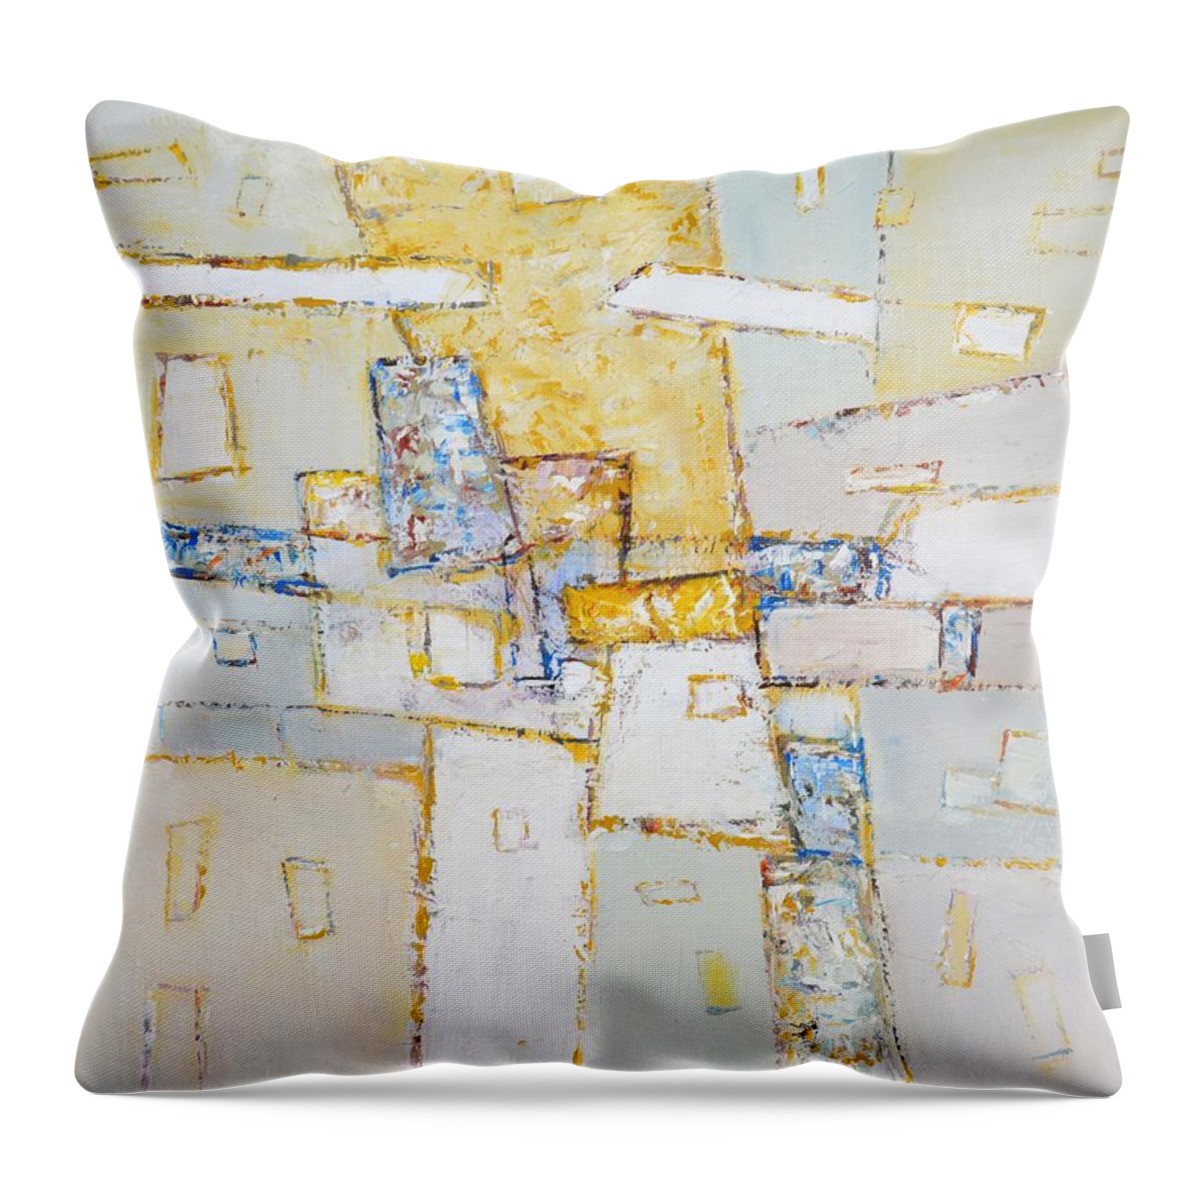 Abstraction Throw Pillow featuring the painting 	Abstraction 45. by Iryna Kastsova